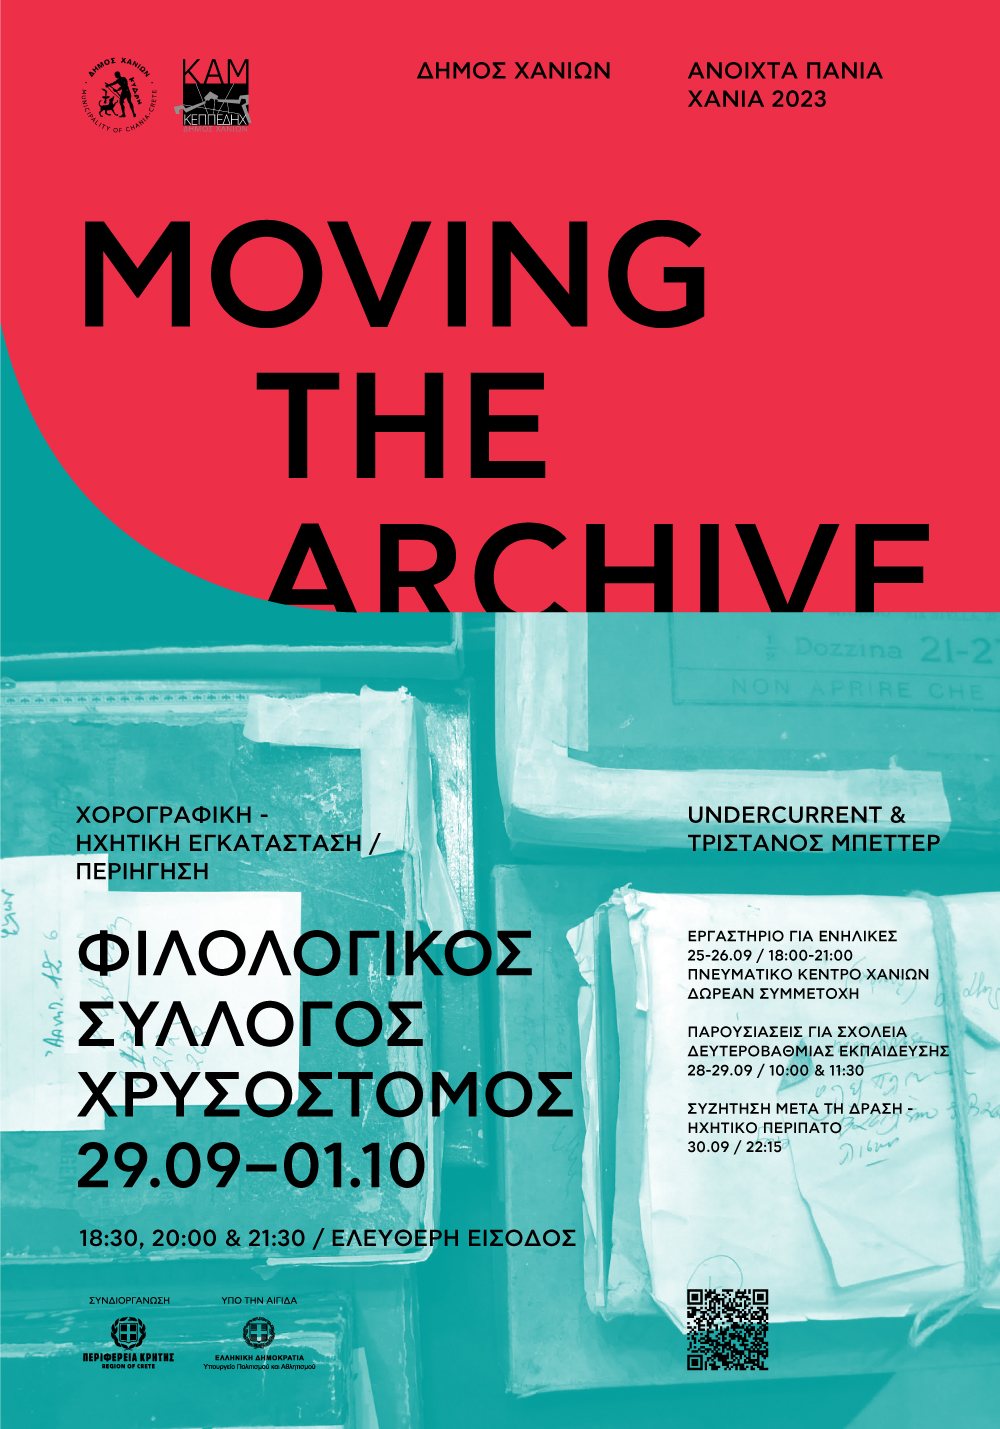 MOVING THE ARCHIVE